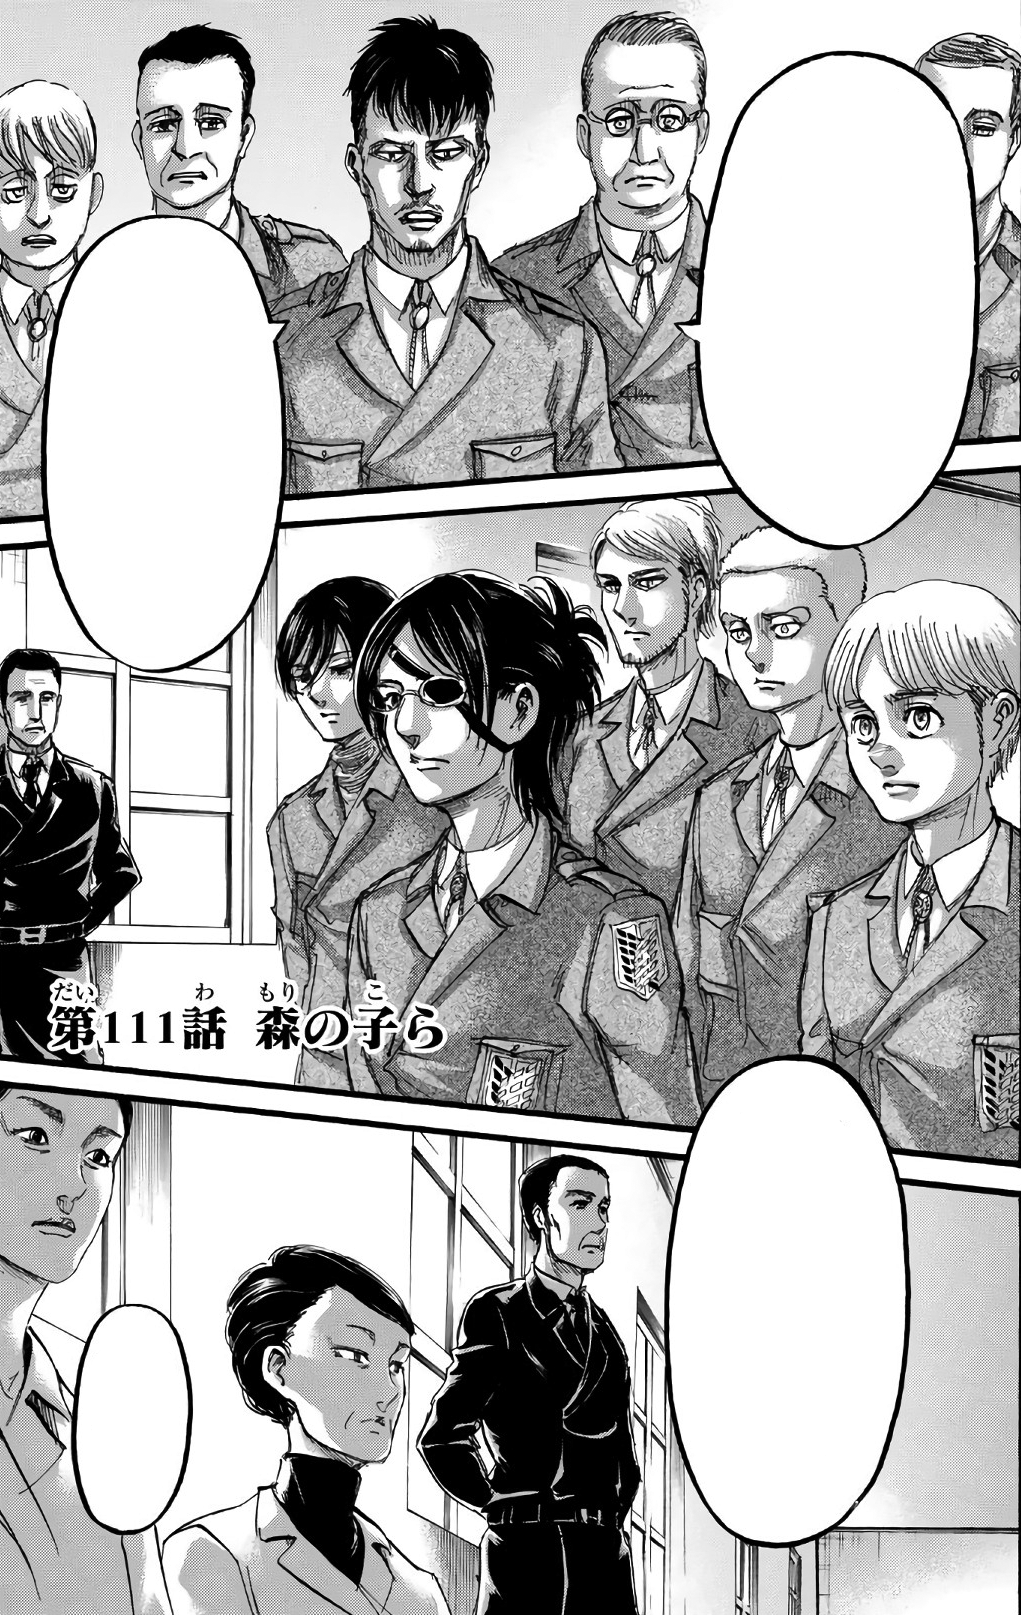 Attack on Titan manga receives an additional Volume - What is Isayama  cooking?